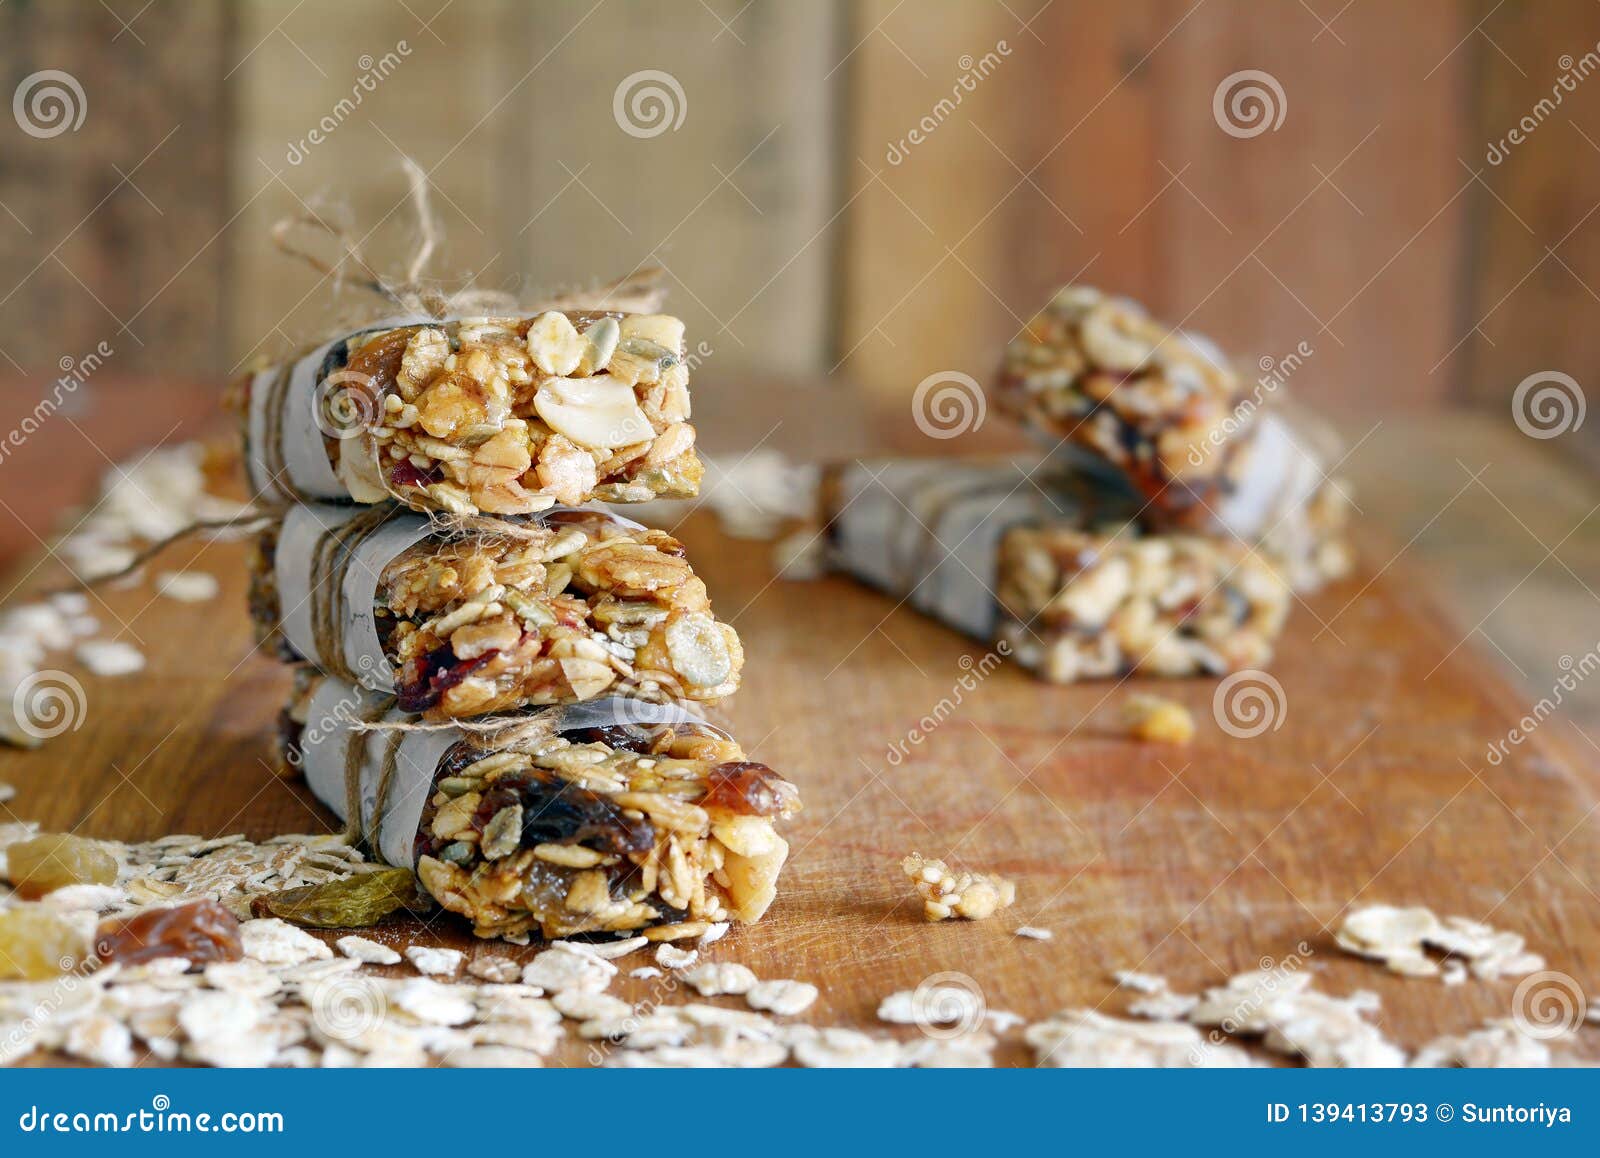 homemade granola energy bars with figs, oatmeal, almond, dry cranberry, dates, nuts, raisins, sesame and healthy snack